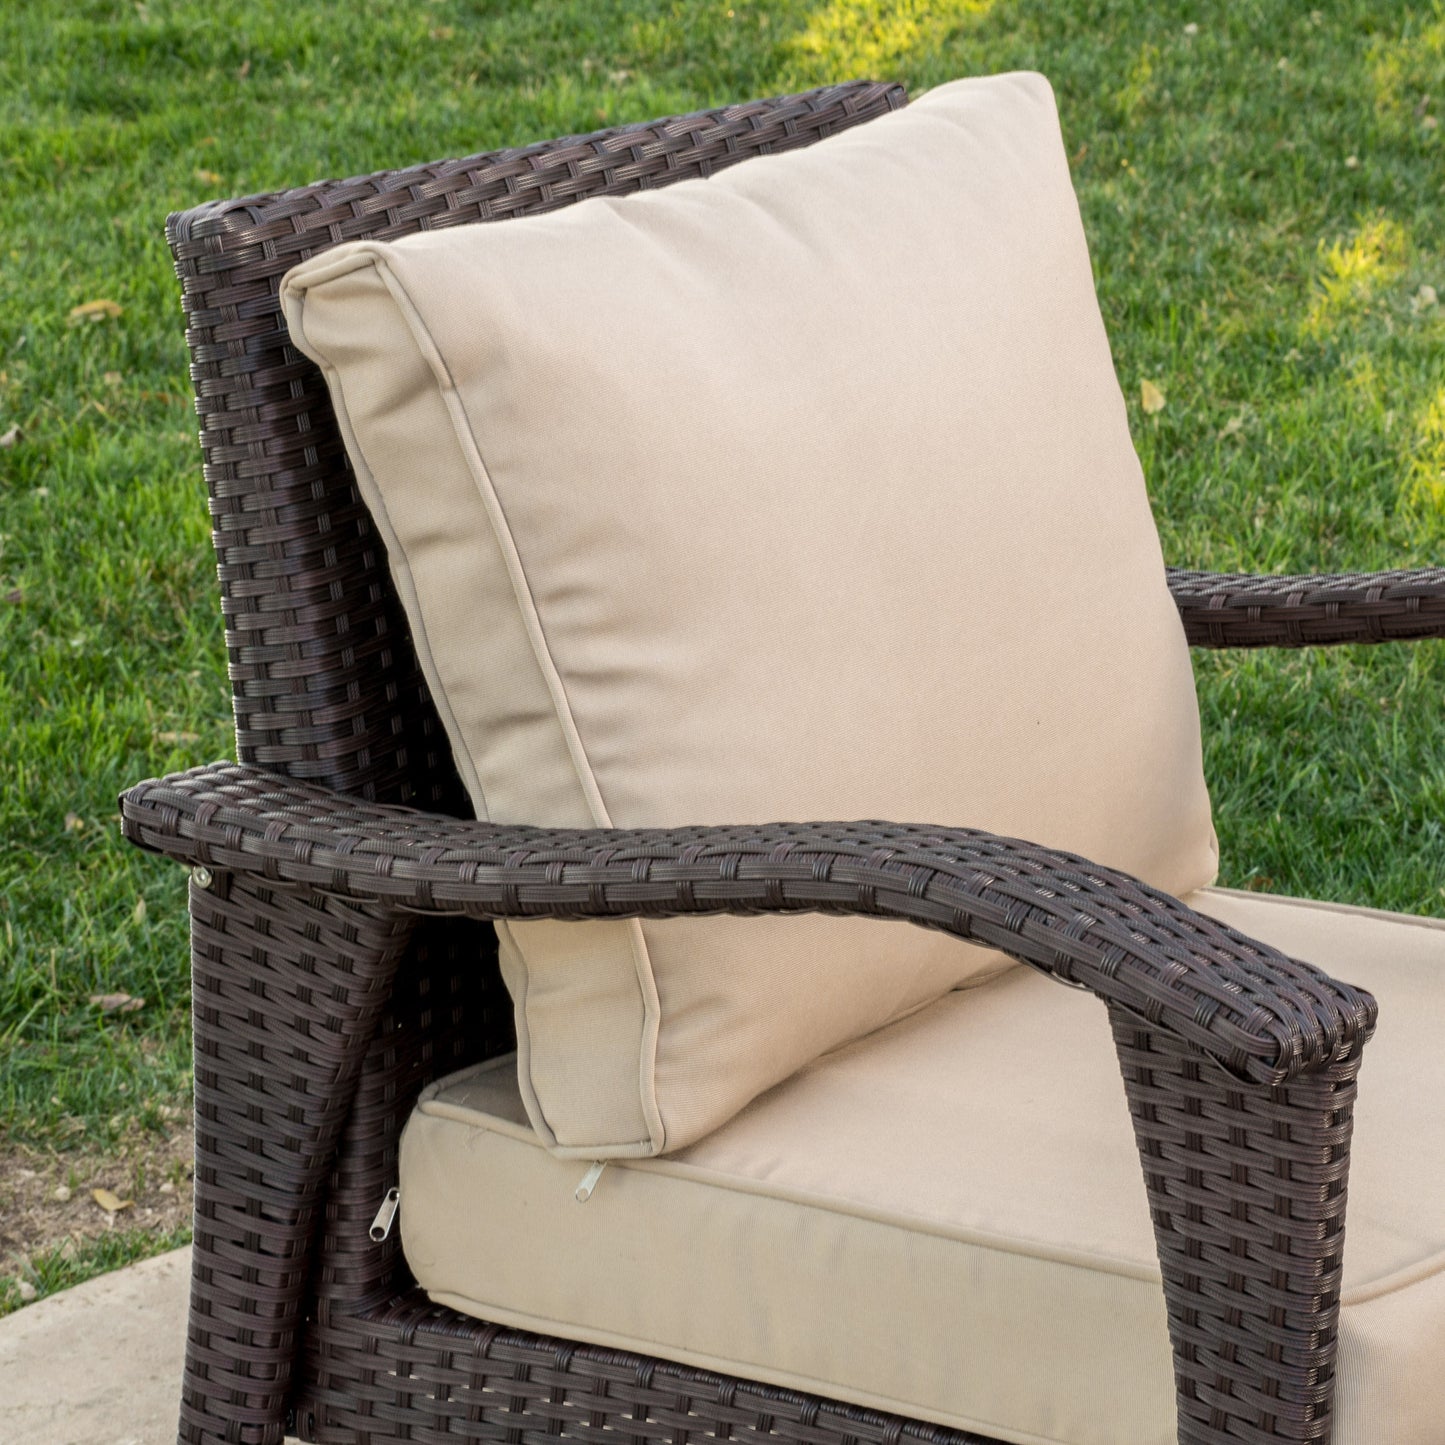 Maui Outdoor 3-piece Brown Wicker Chat Set with Cushions